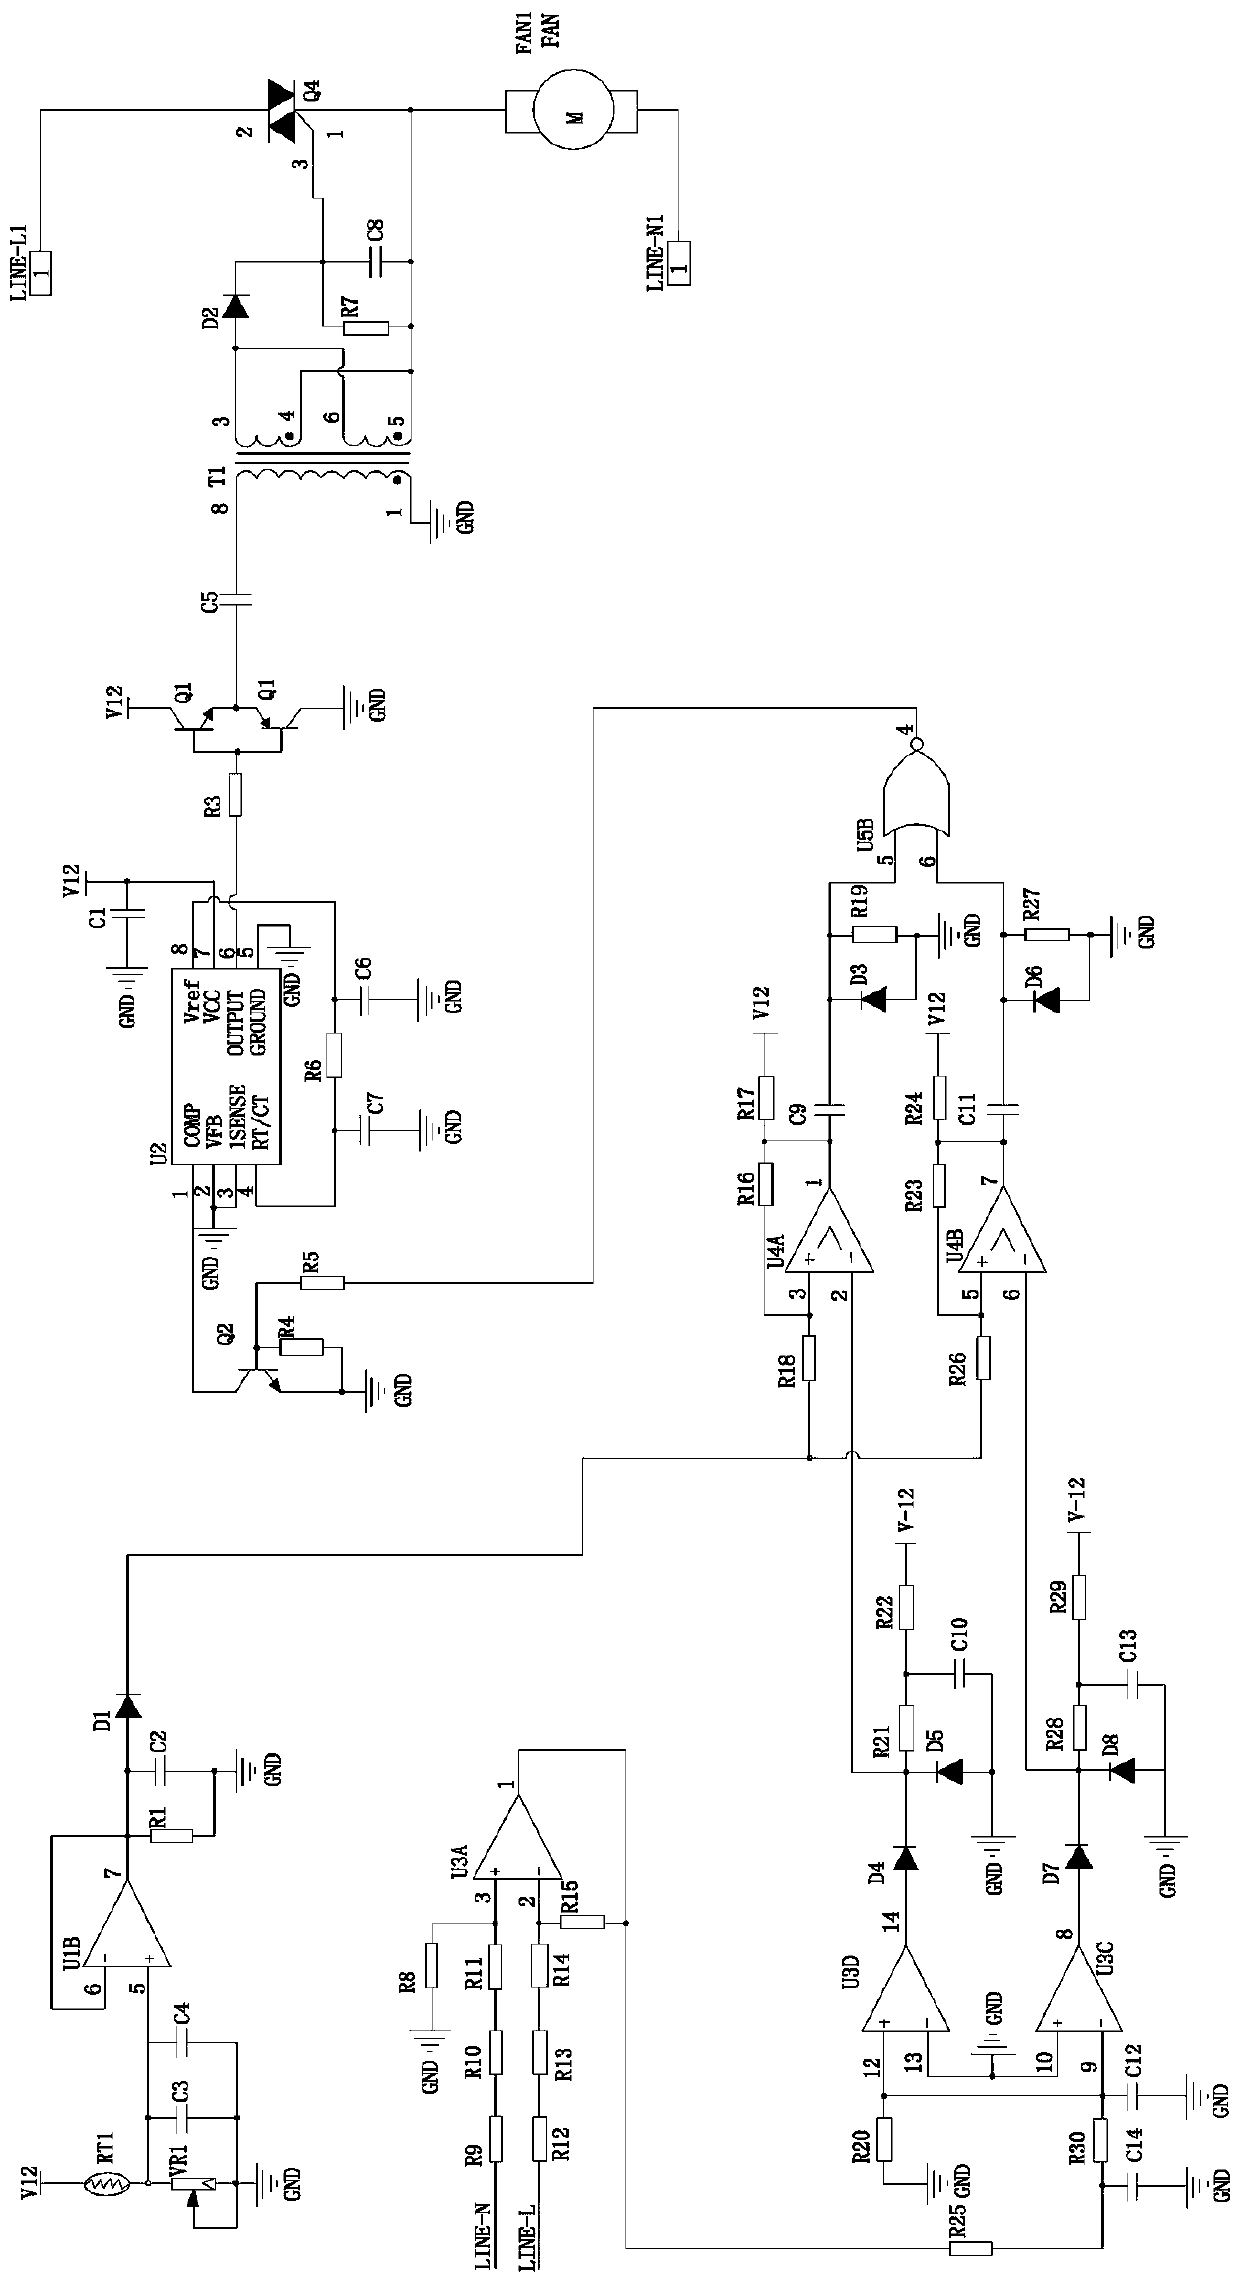 A stepless speed regulation control circuit for an AC fan